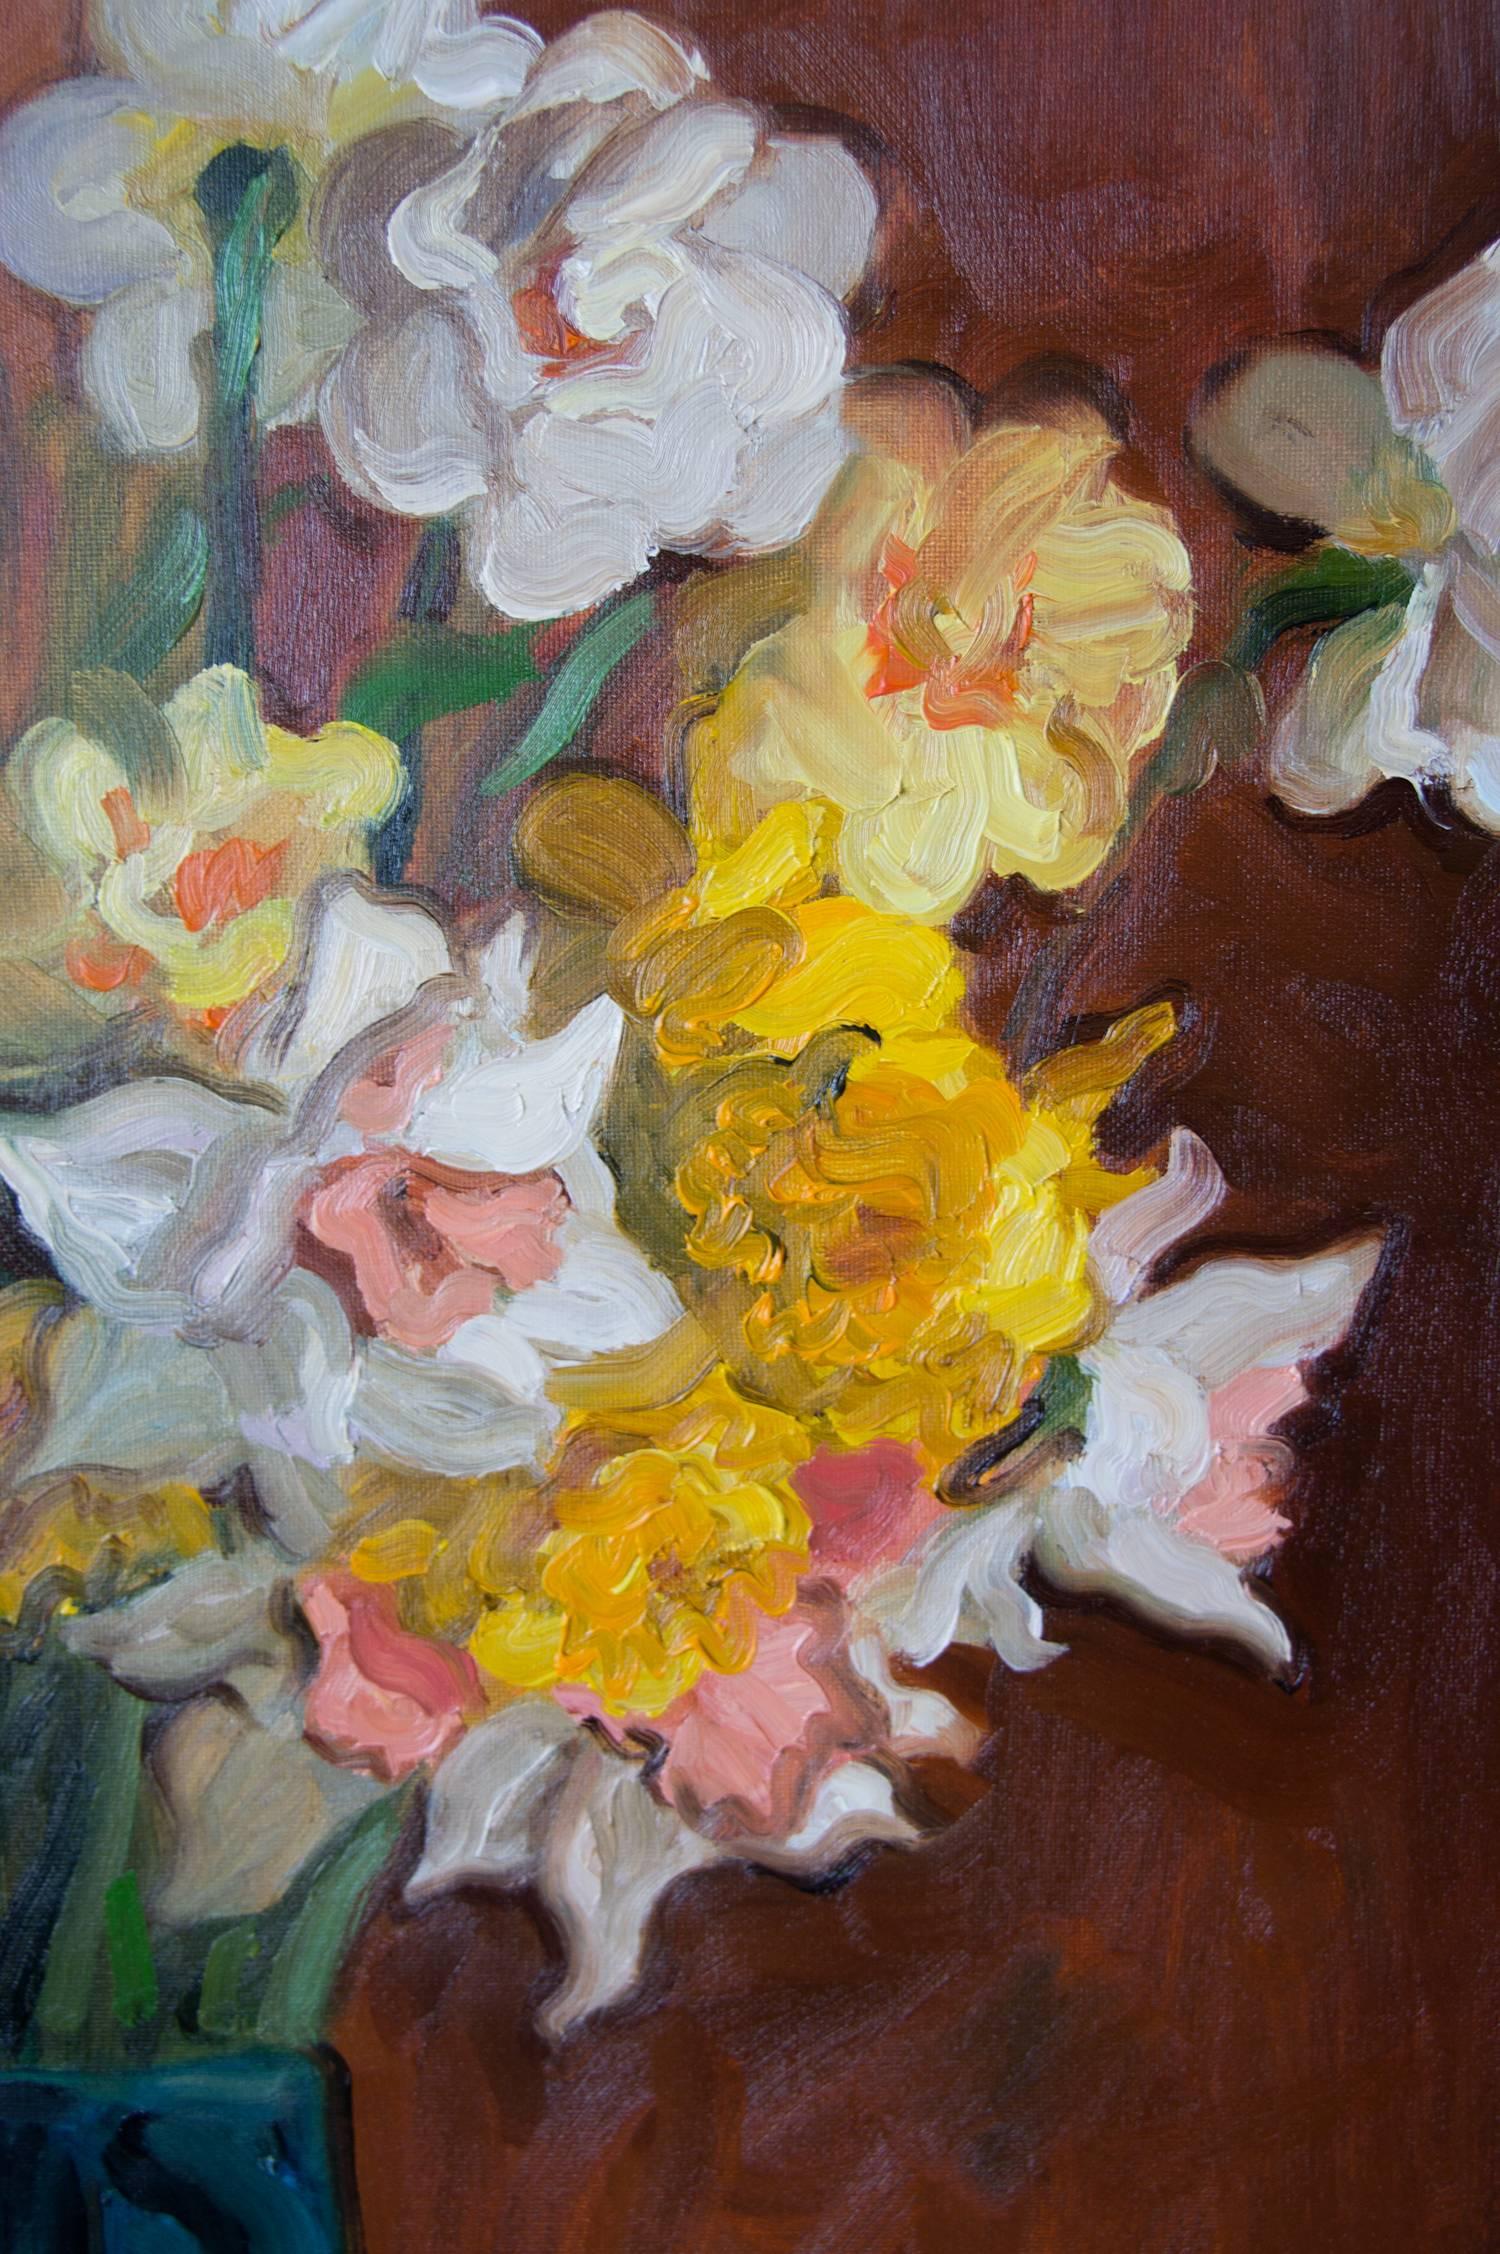 Title: Still Life with Four Species of Narcissus
Artist: Elina Arbidane (emerging contemporary Impressionism painter), Latvia
Original hand-painted alla prima oil on canvas still life with Narcissus flowers in vase
Not a print or copy, only one